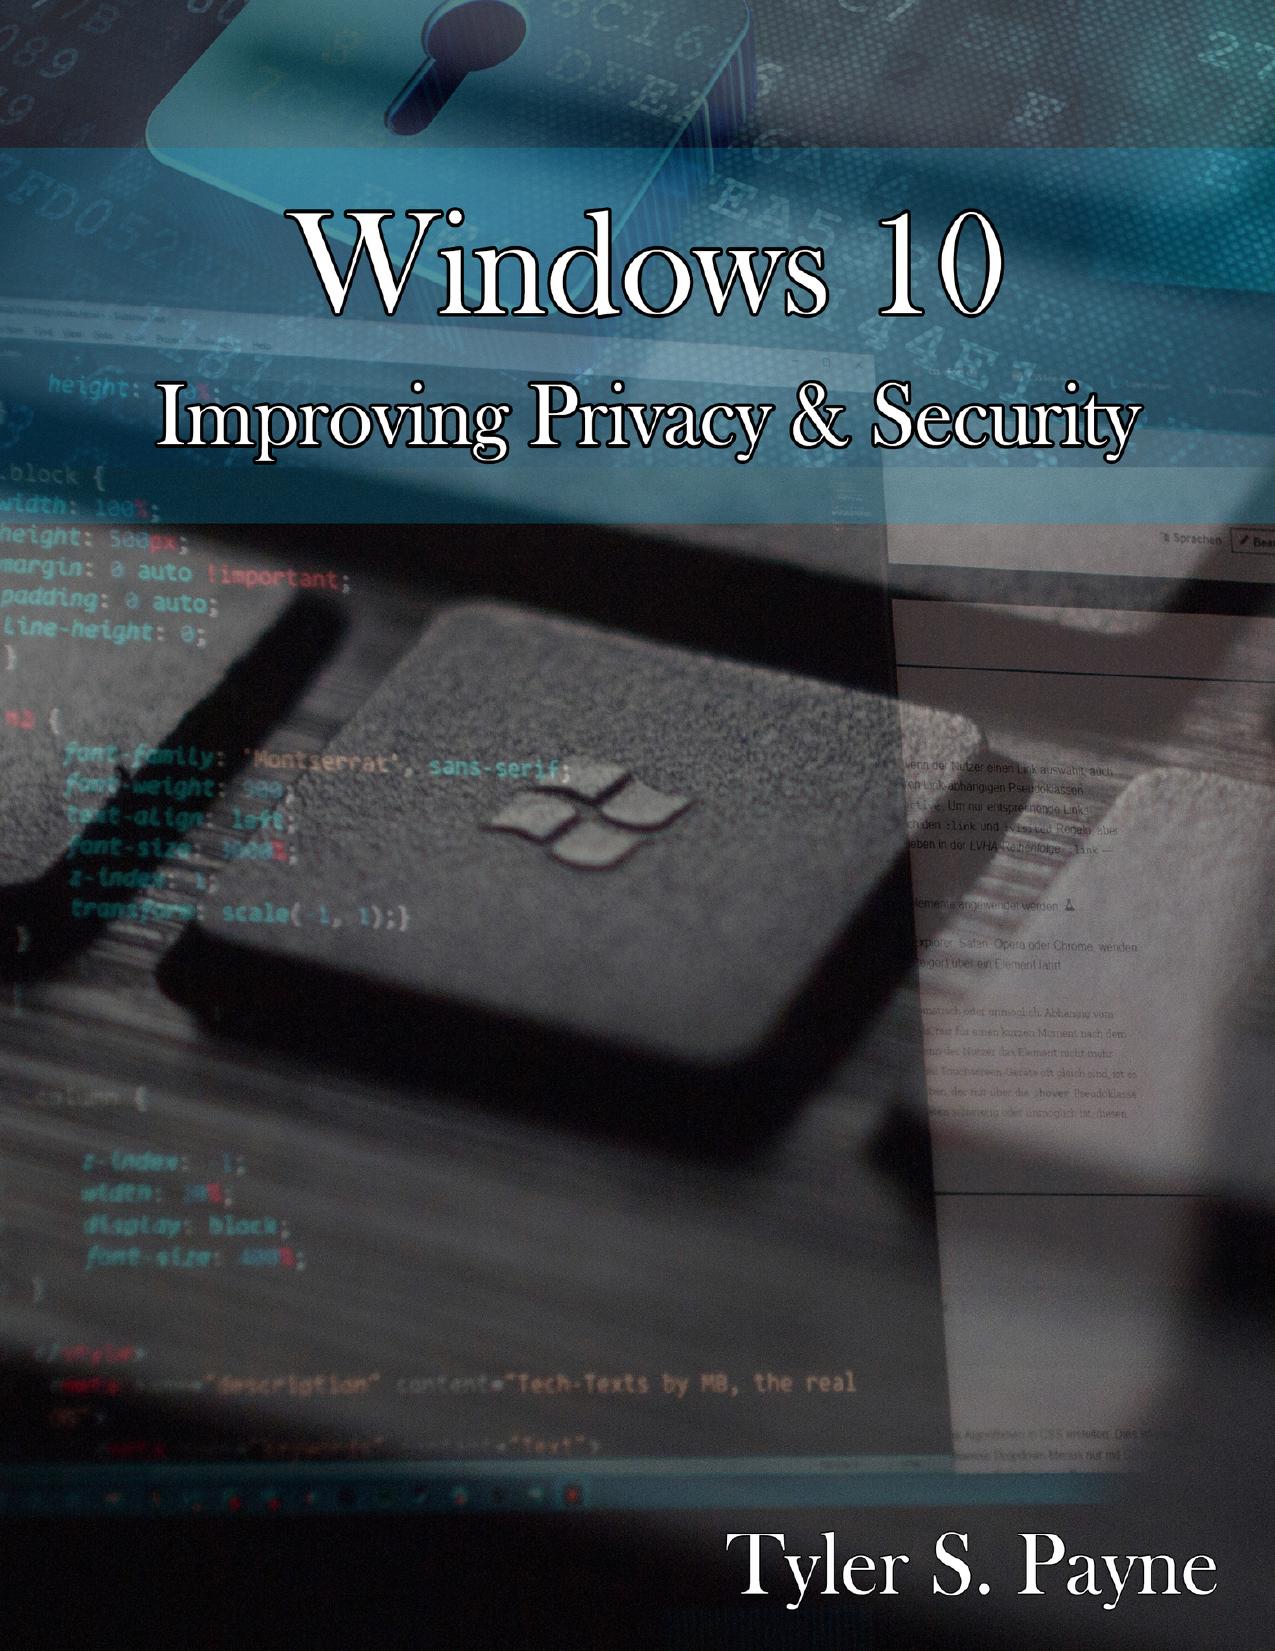 Windows 10: Improving Privacy & Security by Payne Tyler